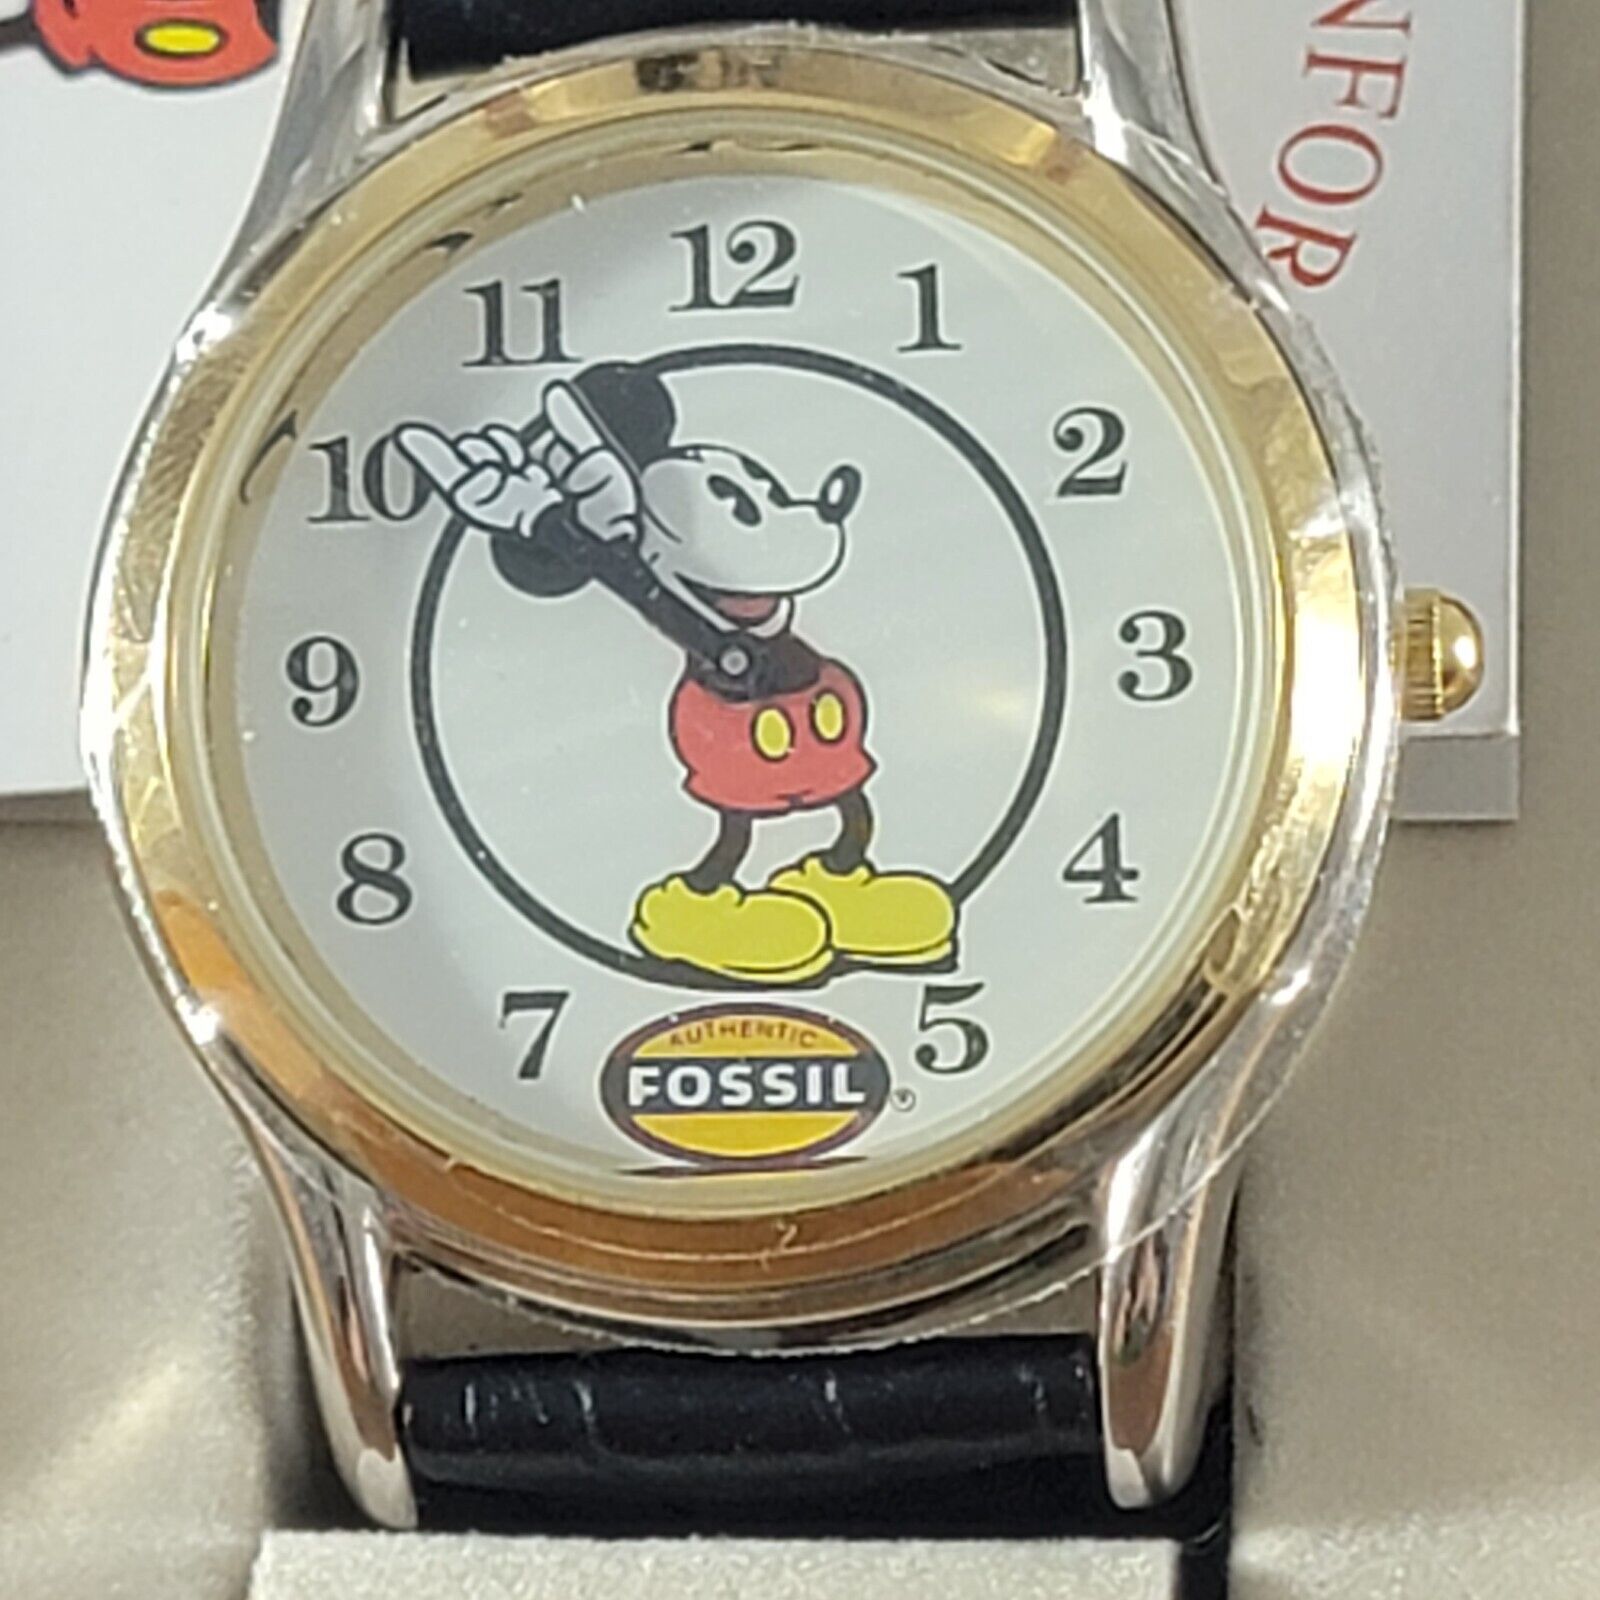 Mickey Mouse Fossil Disney Wrist Watch #135/2000 42nd st Times Sq Disney Store